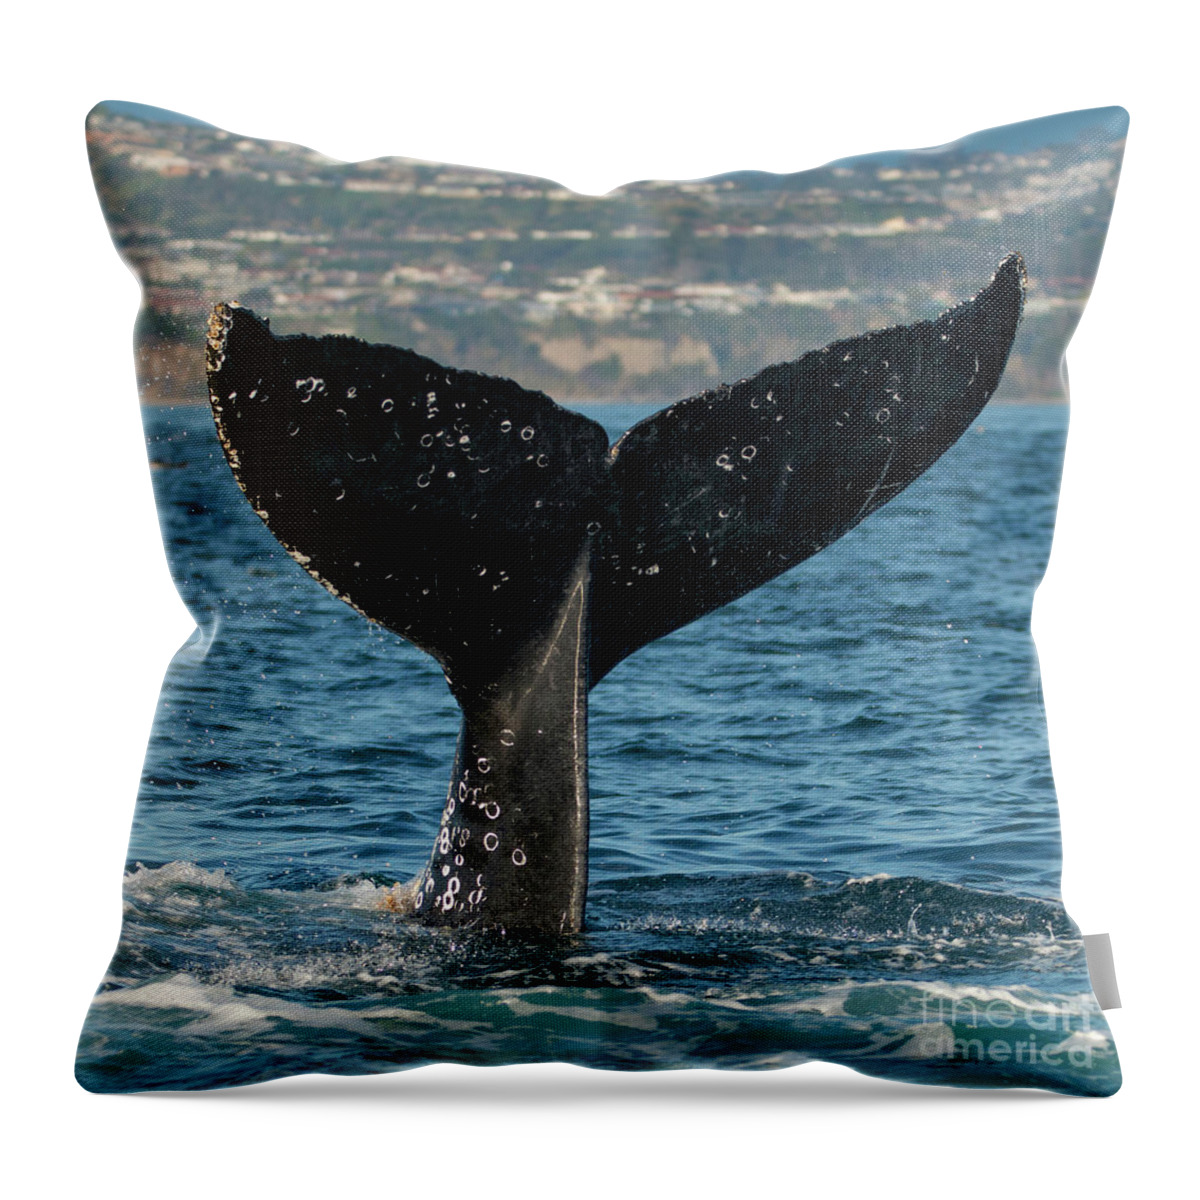 Flukes Throw Pillow featuring the photograph Humpback Tall Fluke Square by Loriannah Hespe